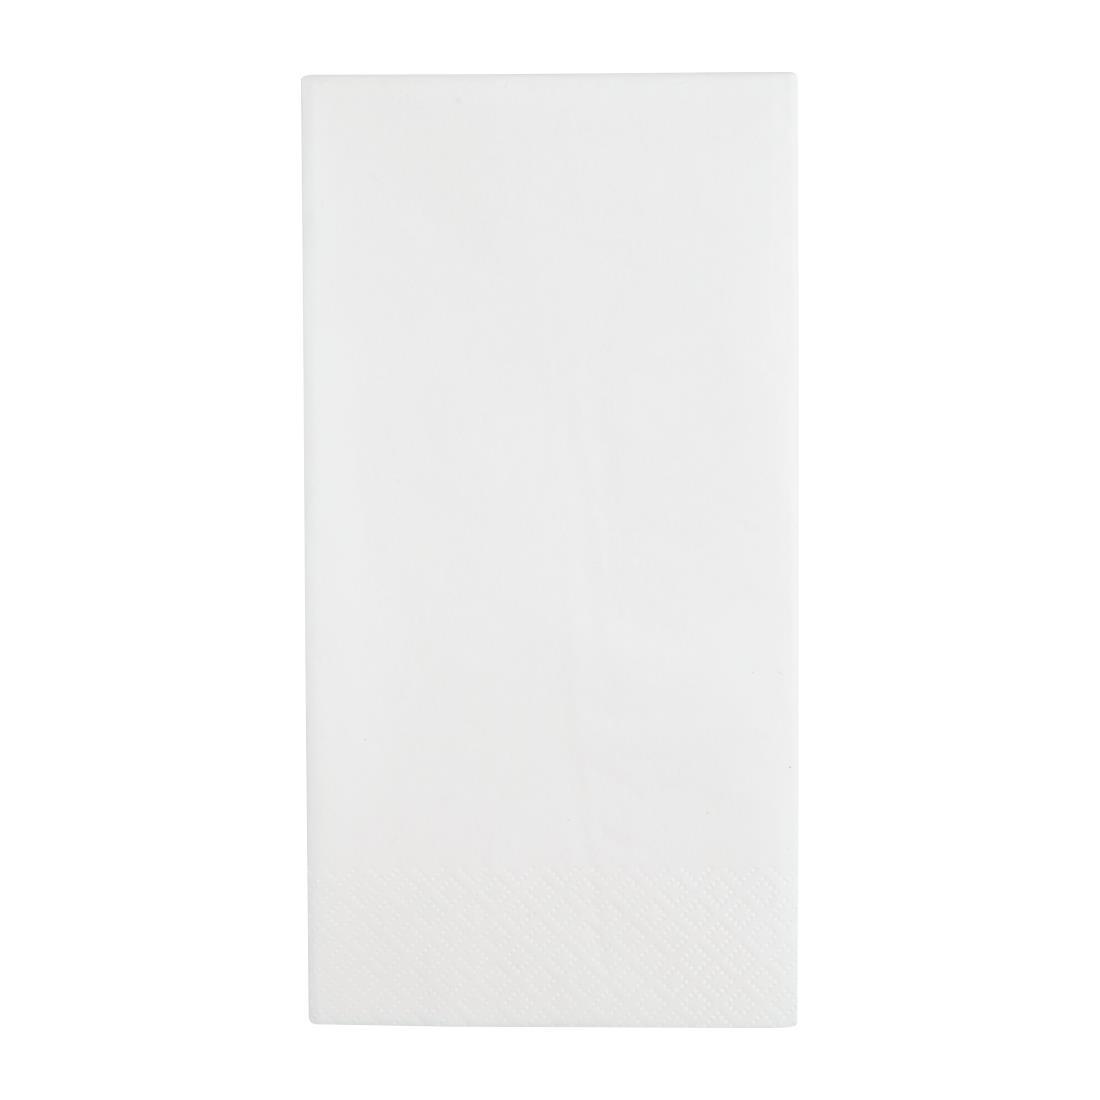 Fiesta Recyclable Dinner Napkin White 40x40cm 3ply 1/8 Fold (Pack of 1000) - FE258  - 2